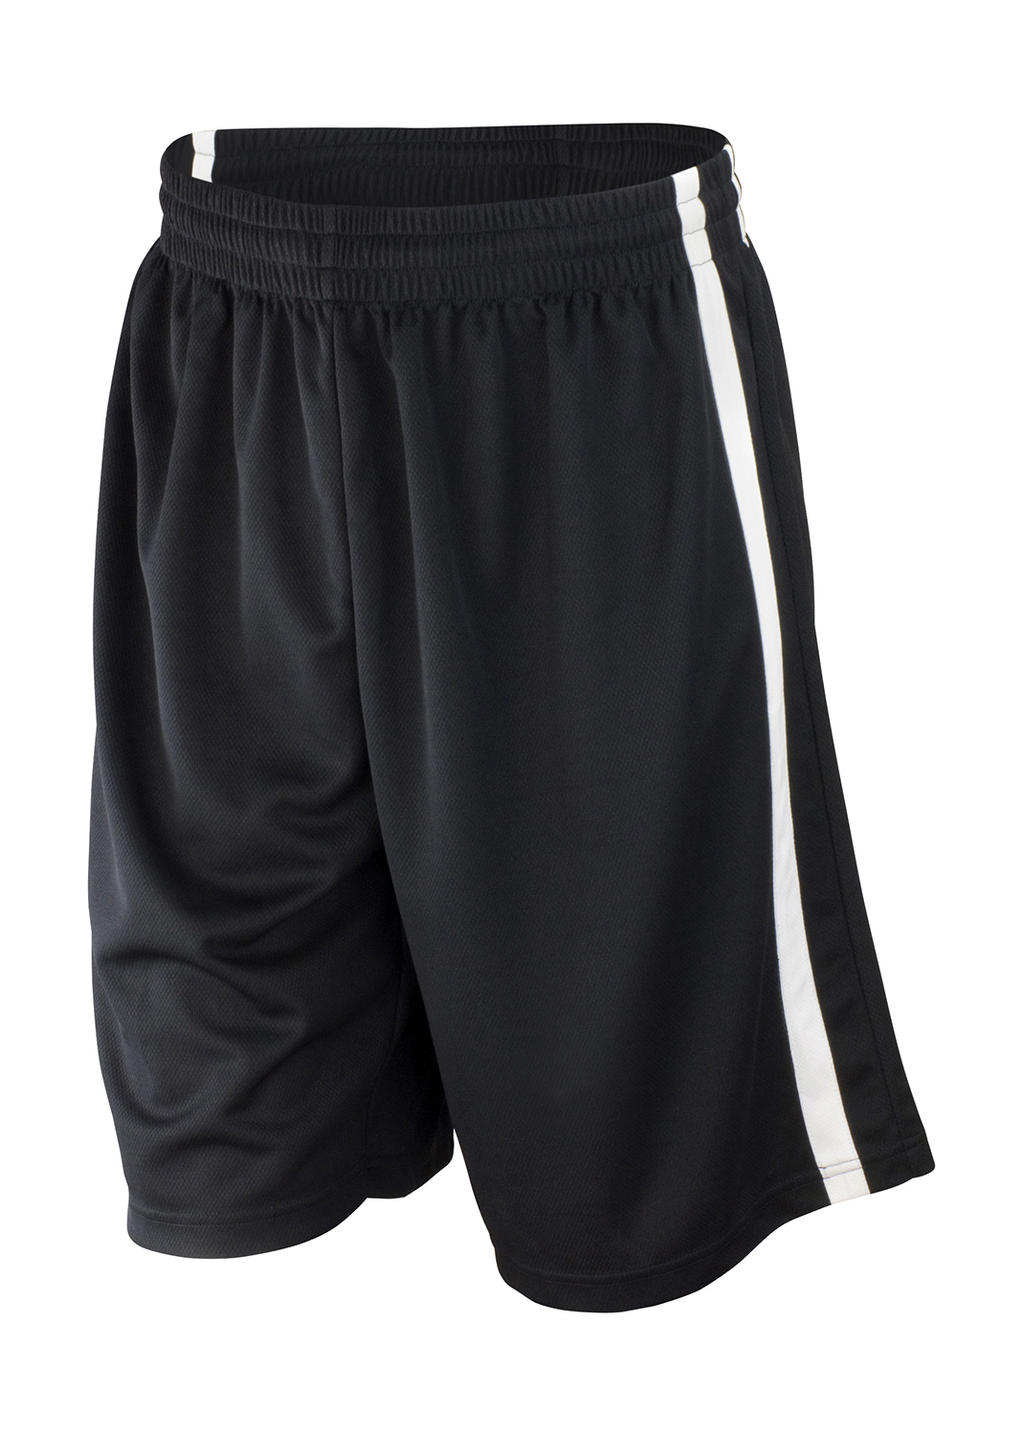  Mens Quick Dry Basketball Shorts in Farbe Black/White